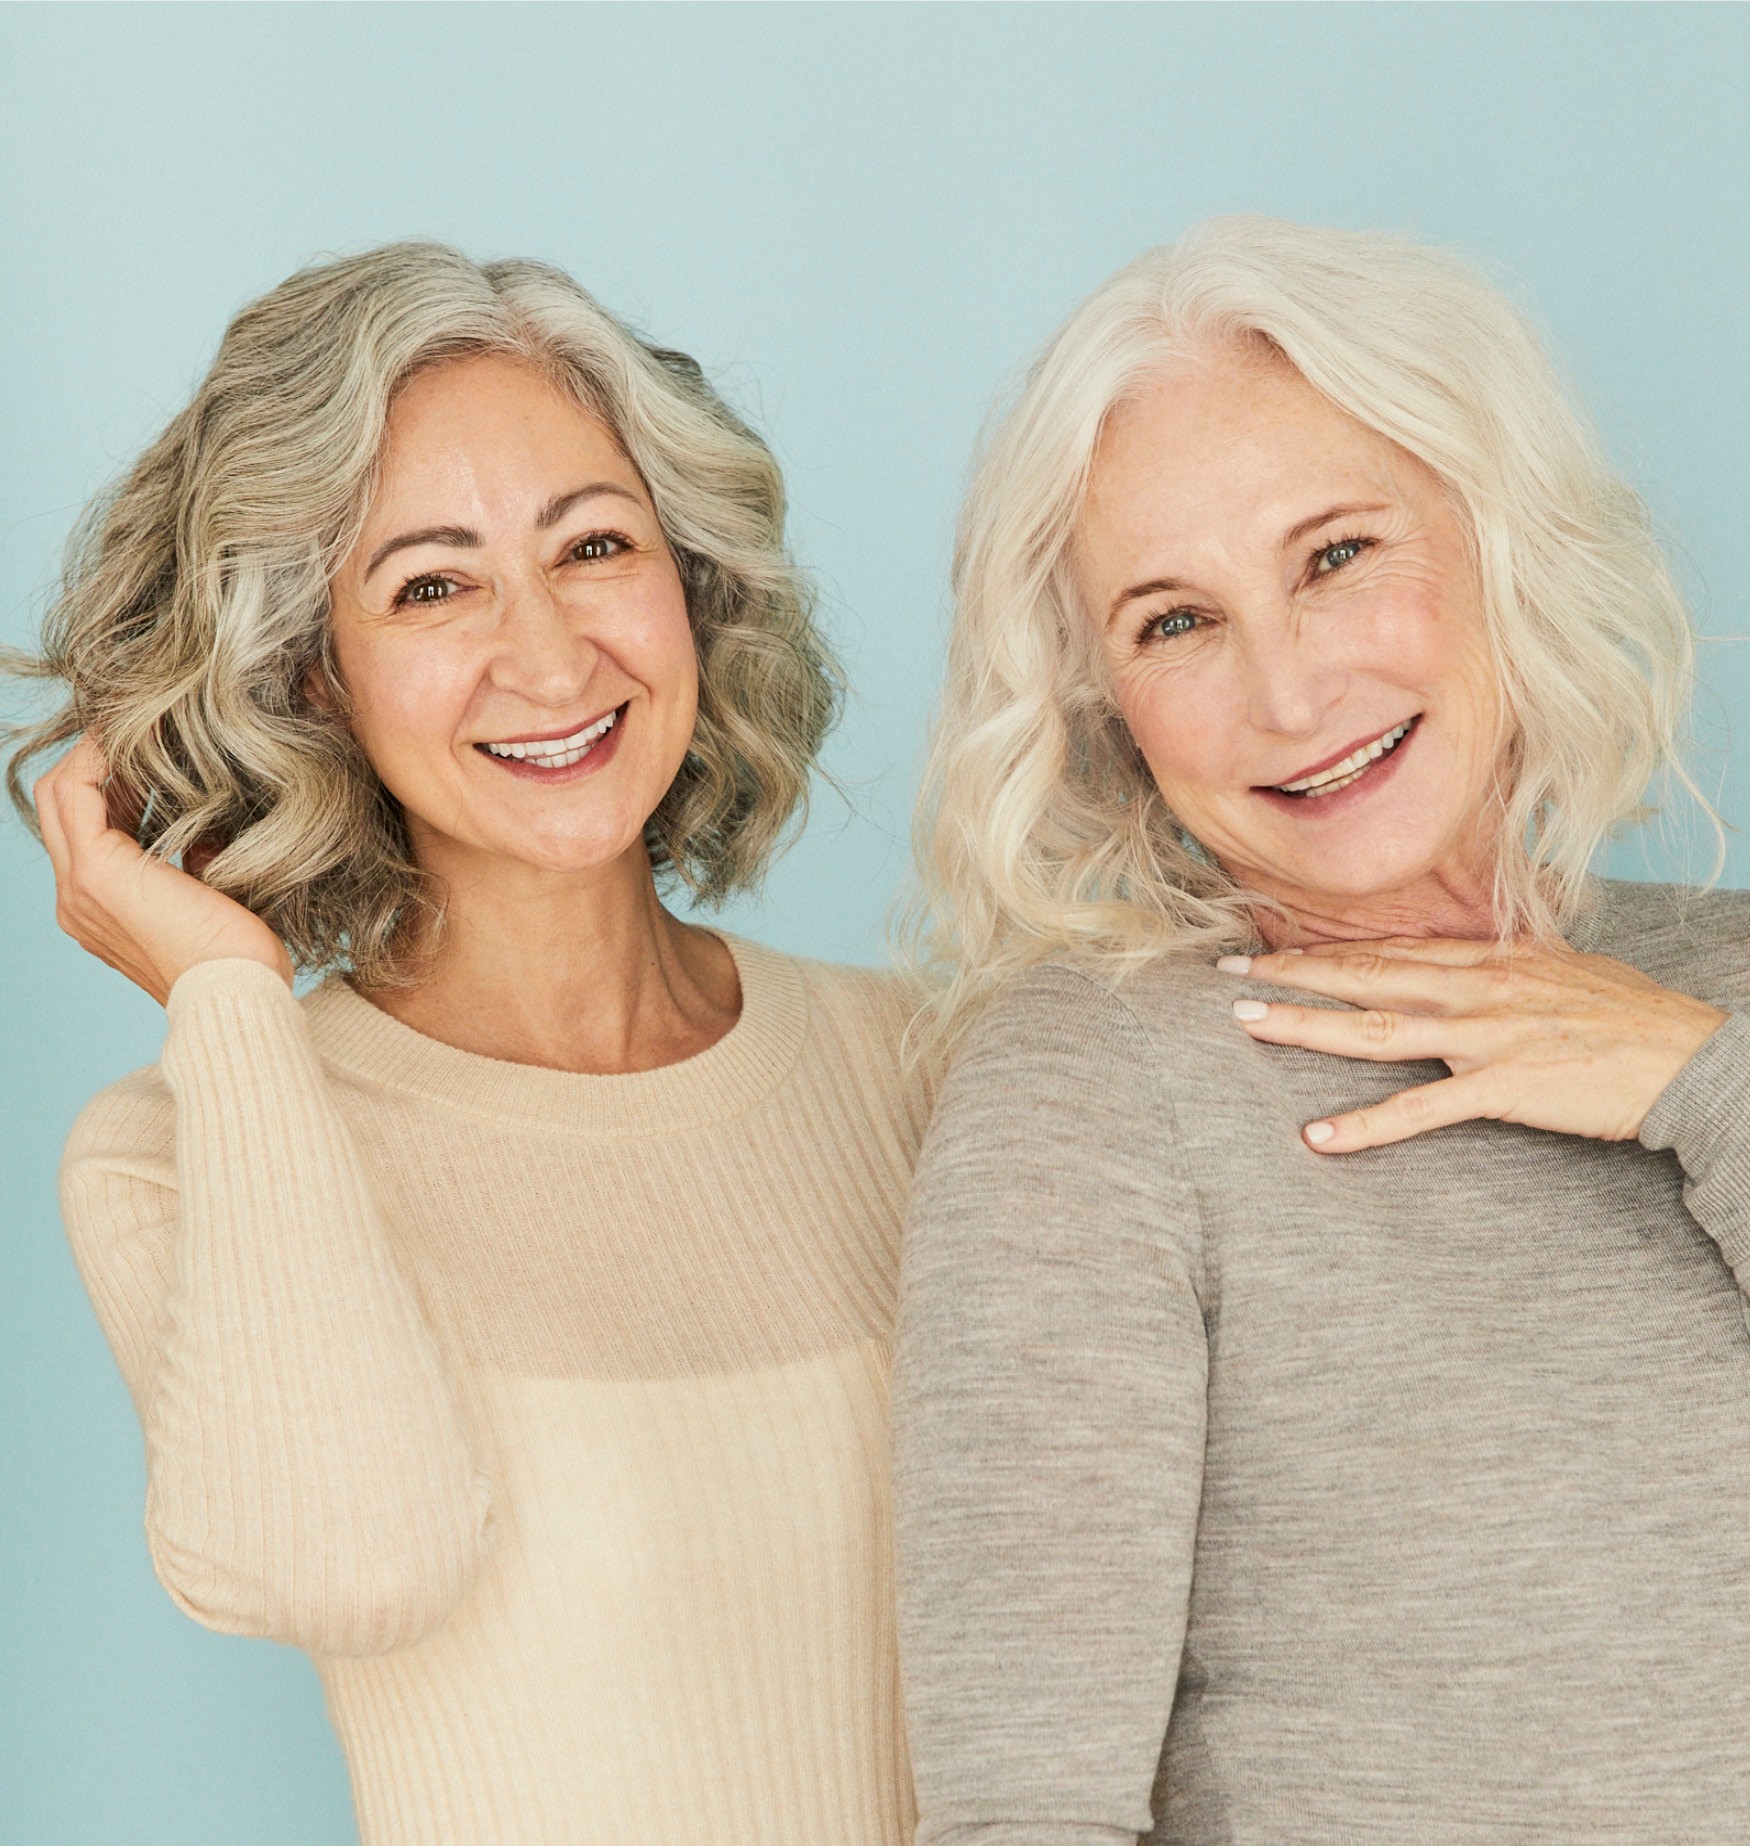 Beautiful, healthy hair is possible at every age. Inside, we share pro-age tips to care for your silver, dyed, transitional or thinning hair as you age.